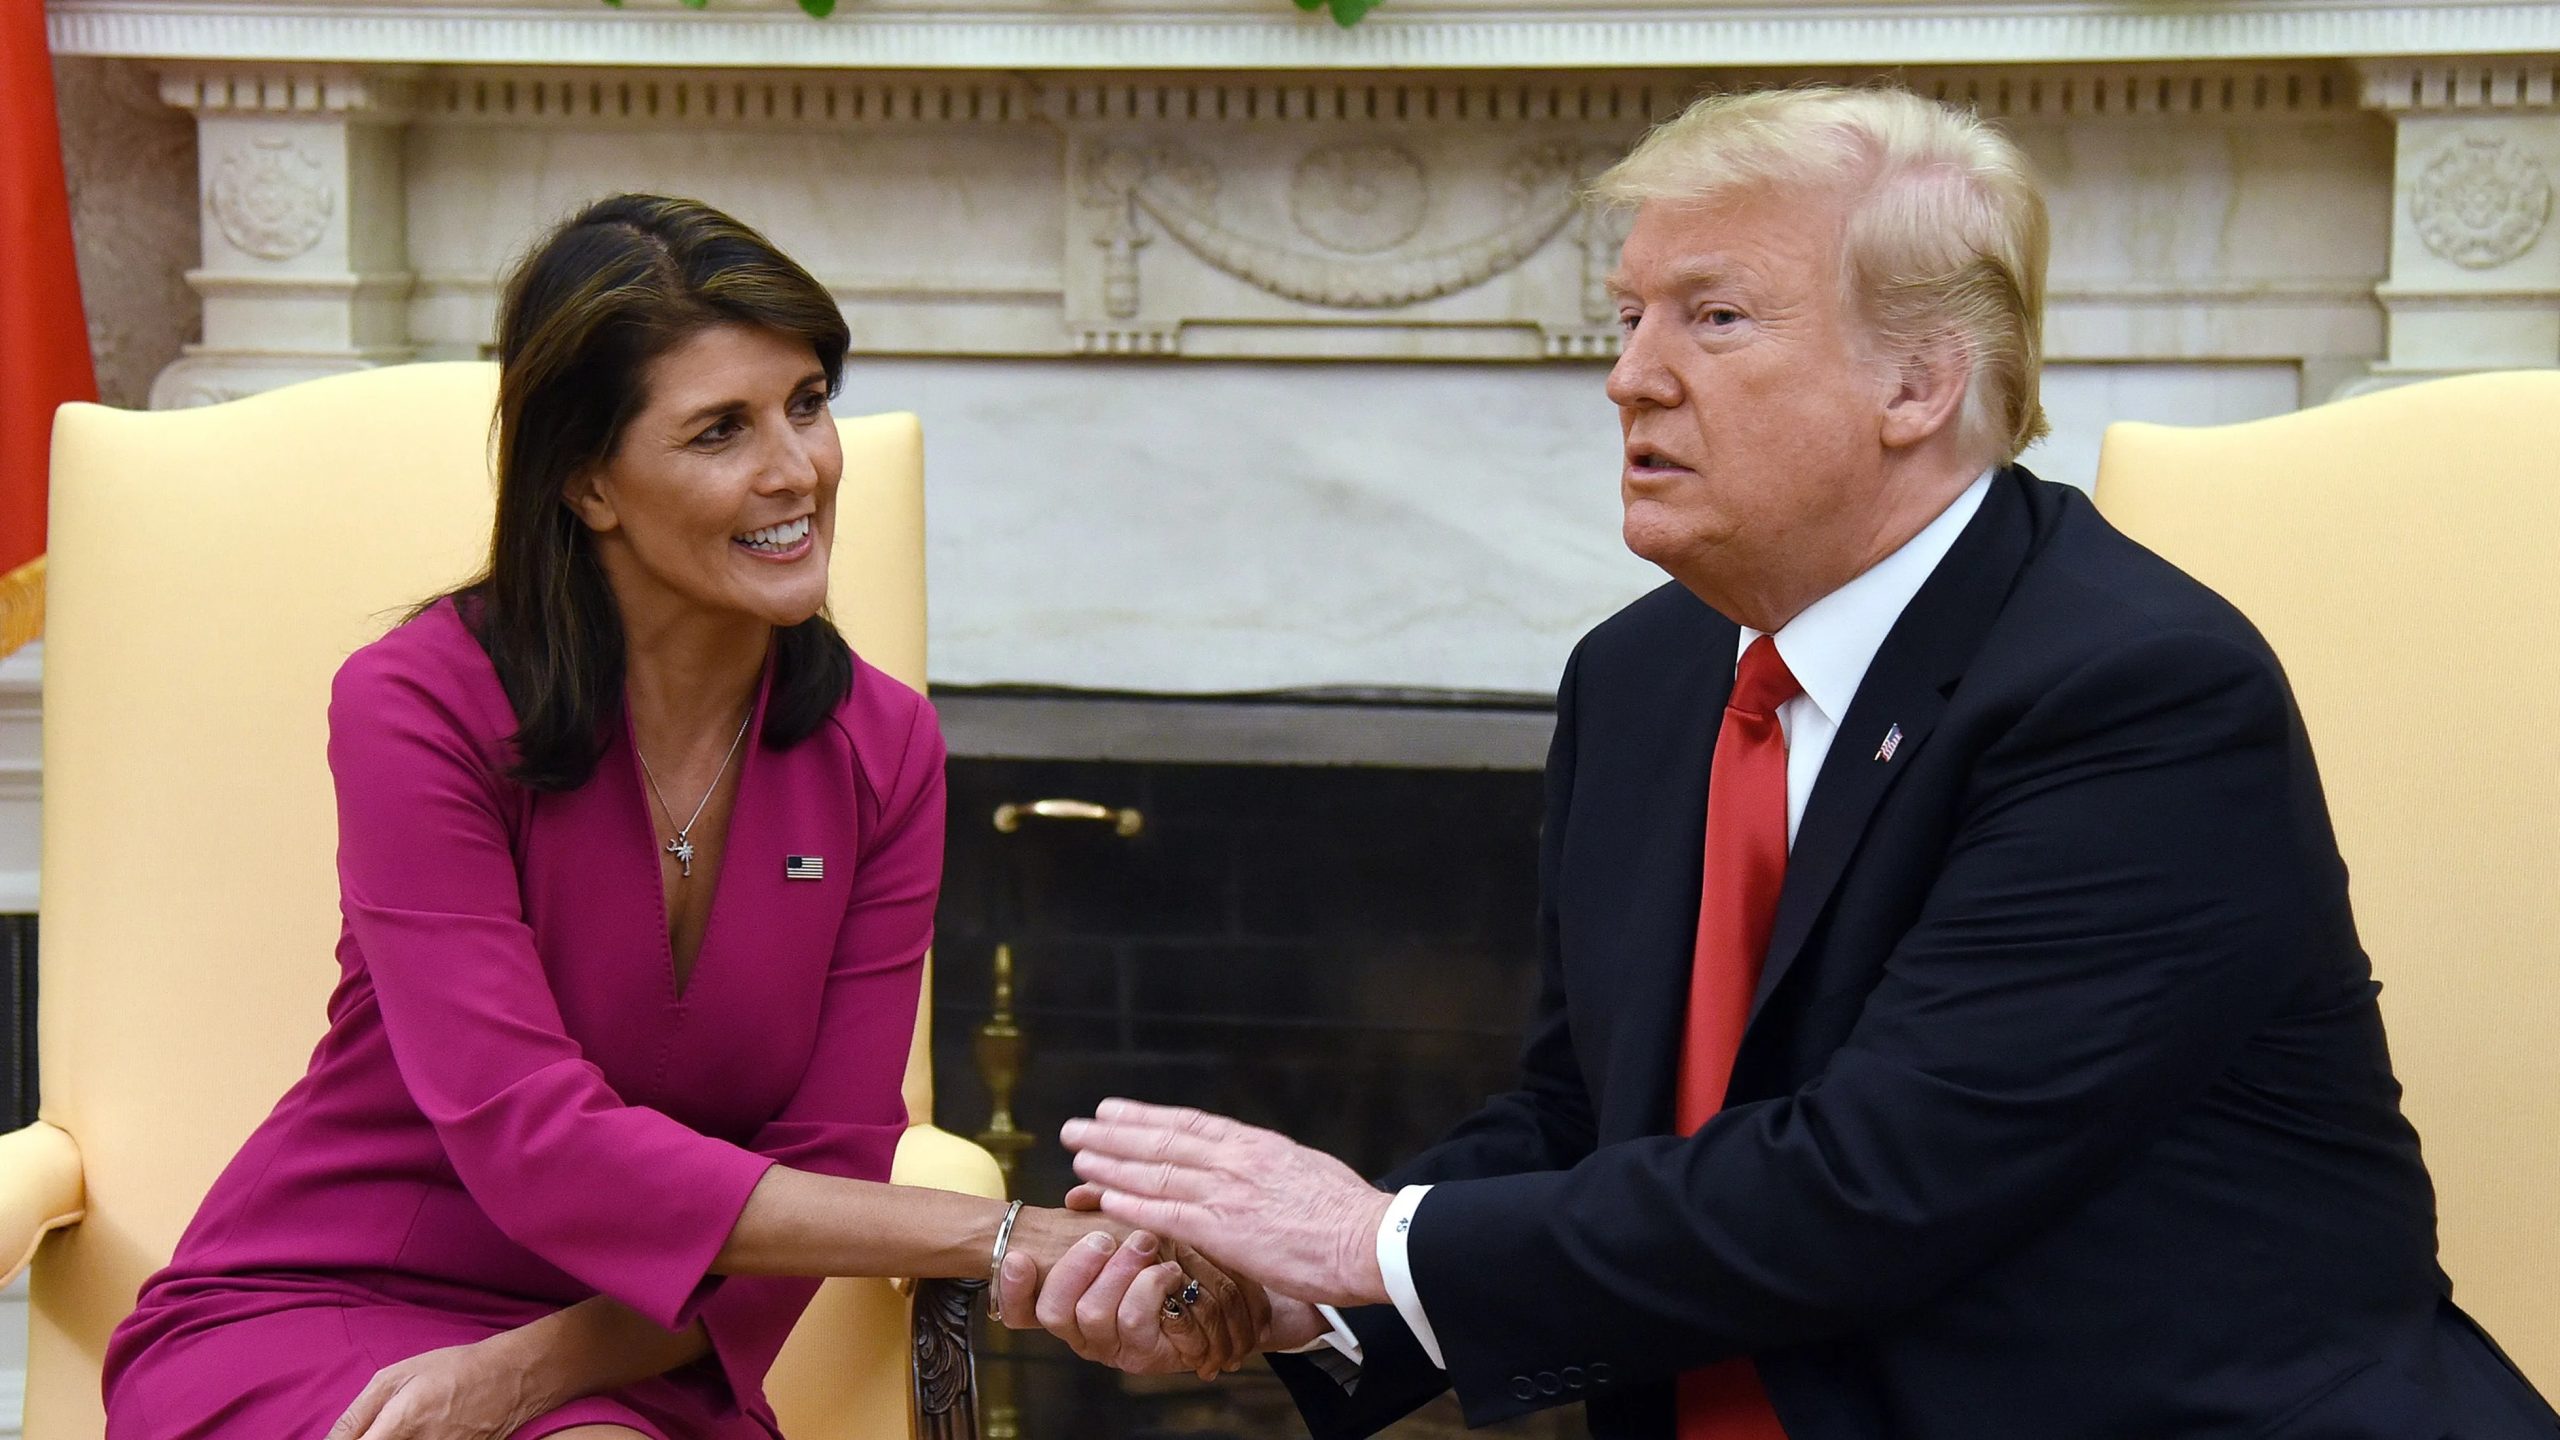 Nikki Haley Secures One-on-One Meeting with Trump at Last, but There's a Reason She Continues to Face Setbacks